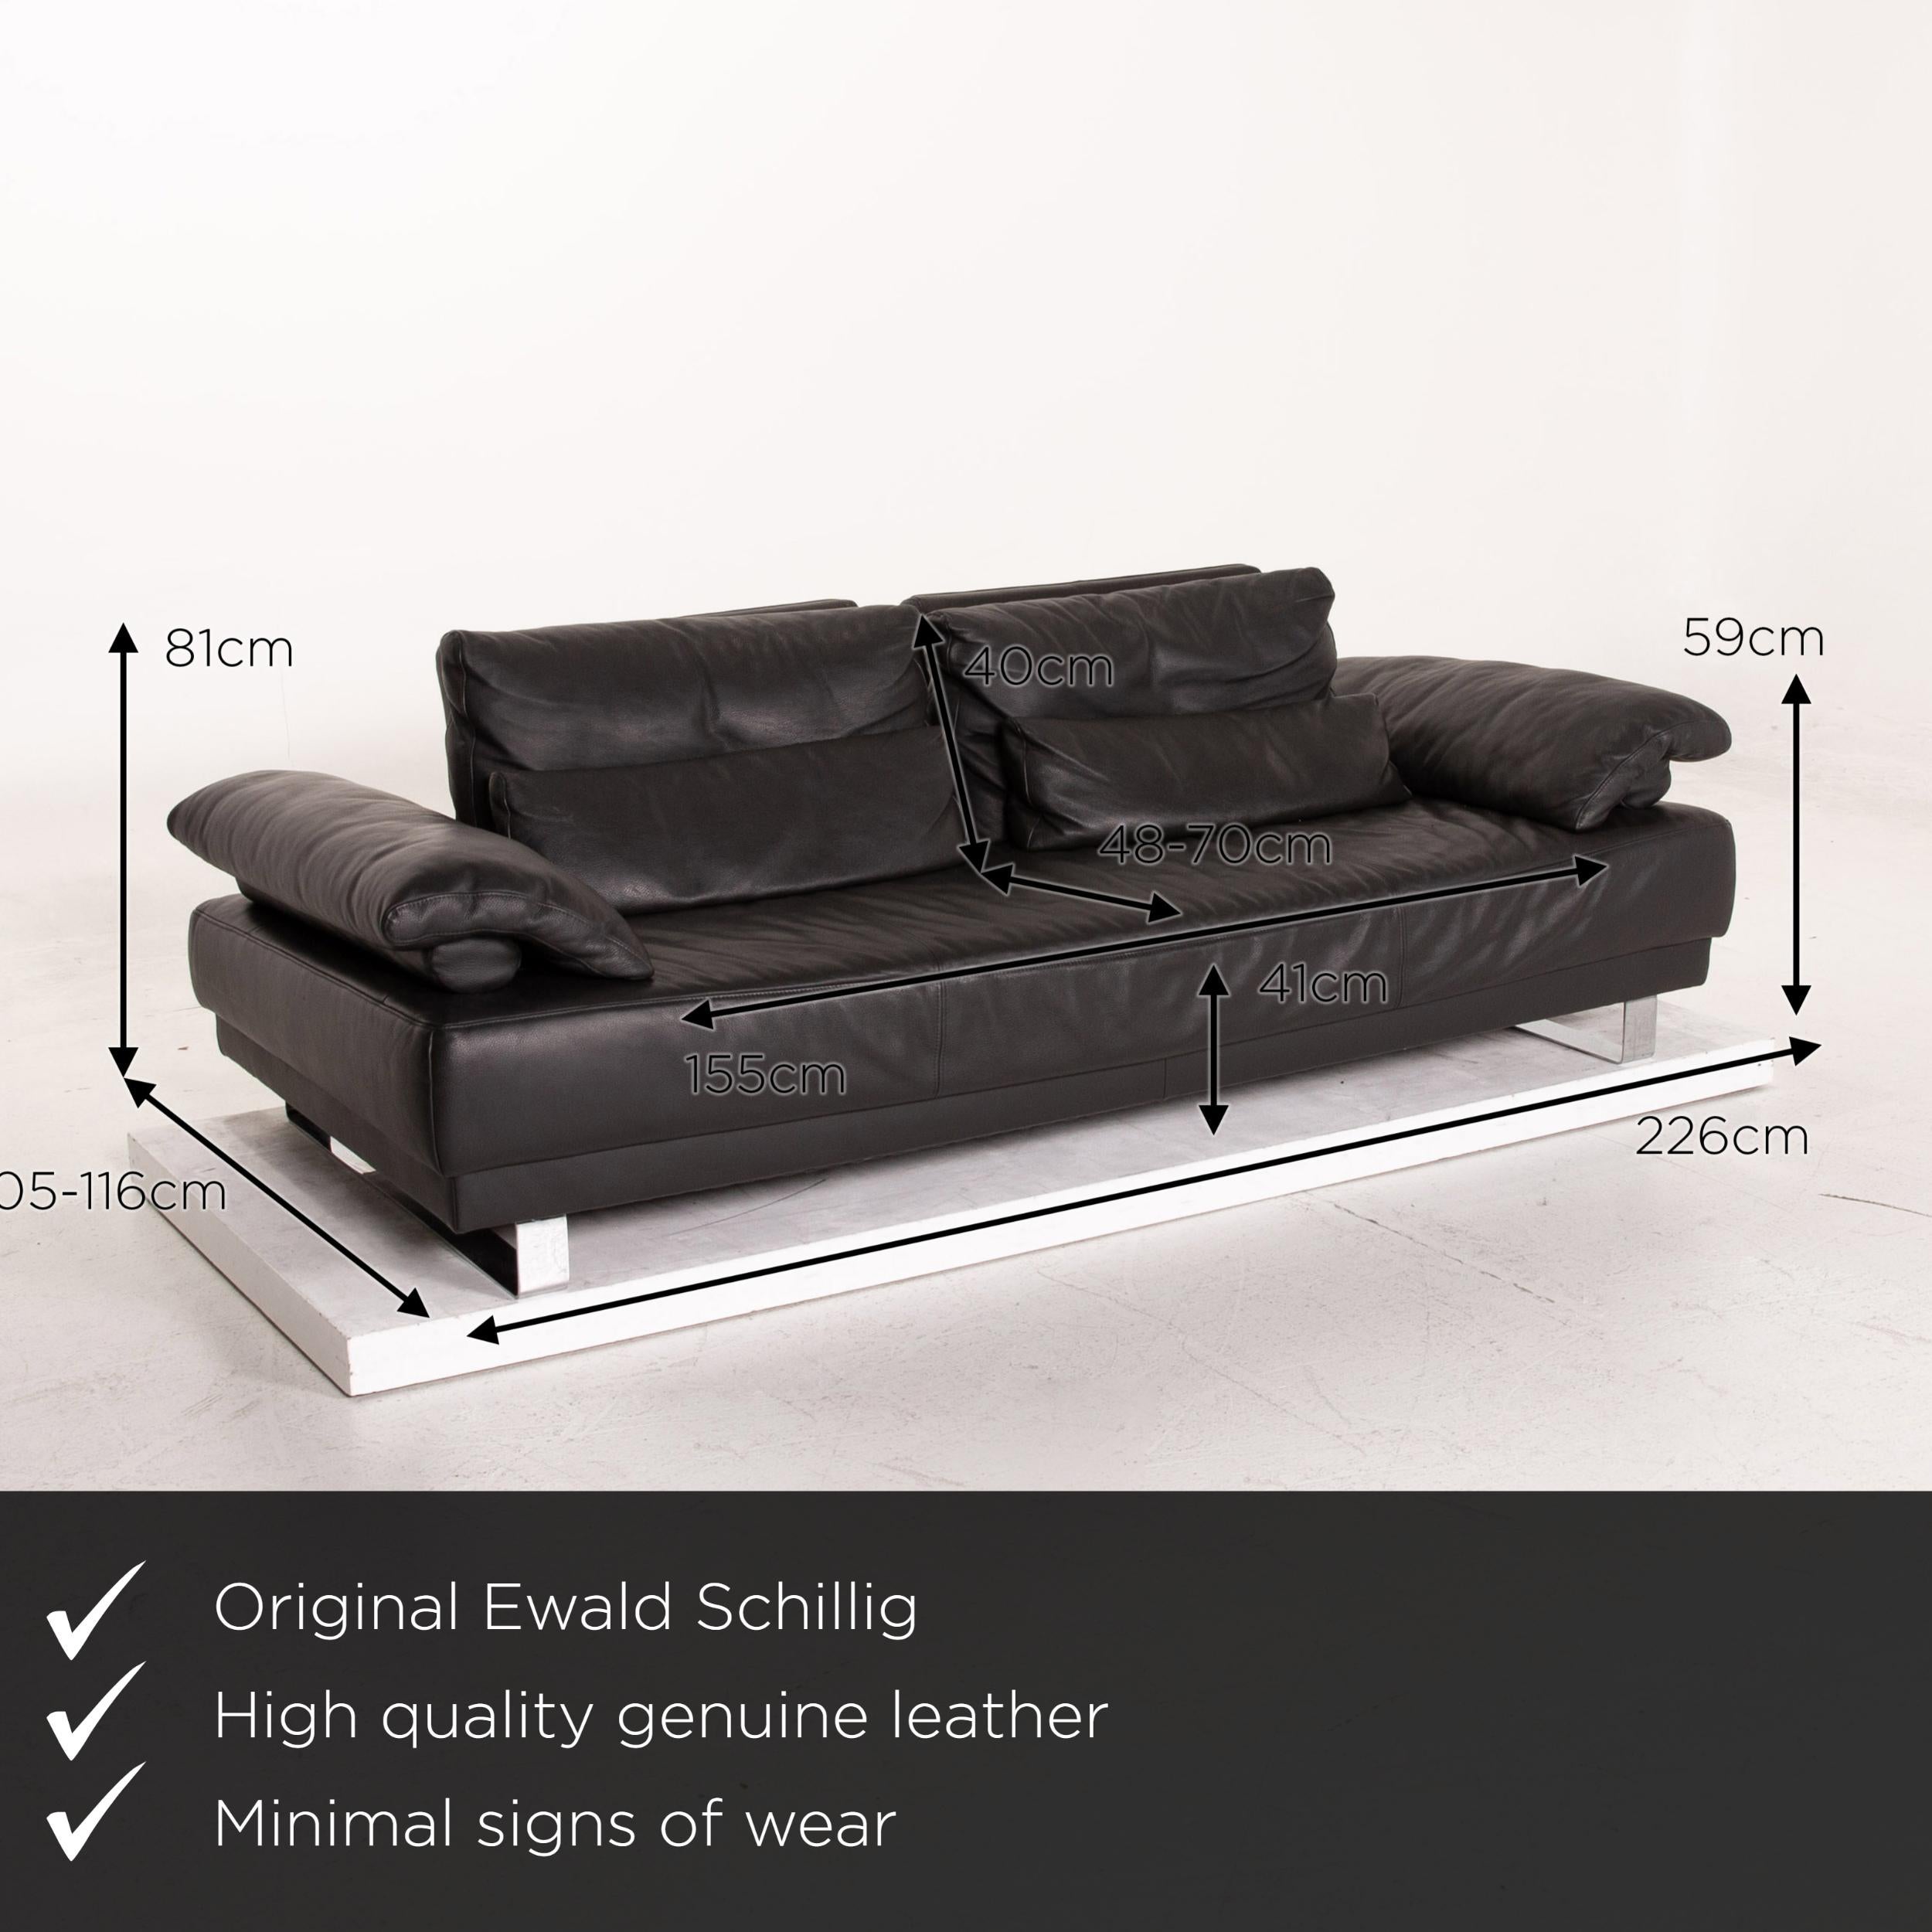 We present to you an Ewald Schillig leather sofa anthracite gray three-seater function couch.


 Product measurements in centimeters:
 

Depth: 105
Width: 226
Height: 81
Seat height: 41
Rest height: 56
Seat depth: 48
Seat width: